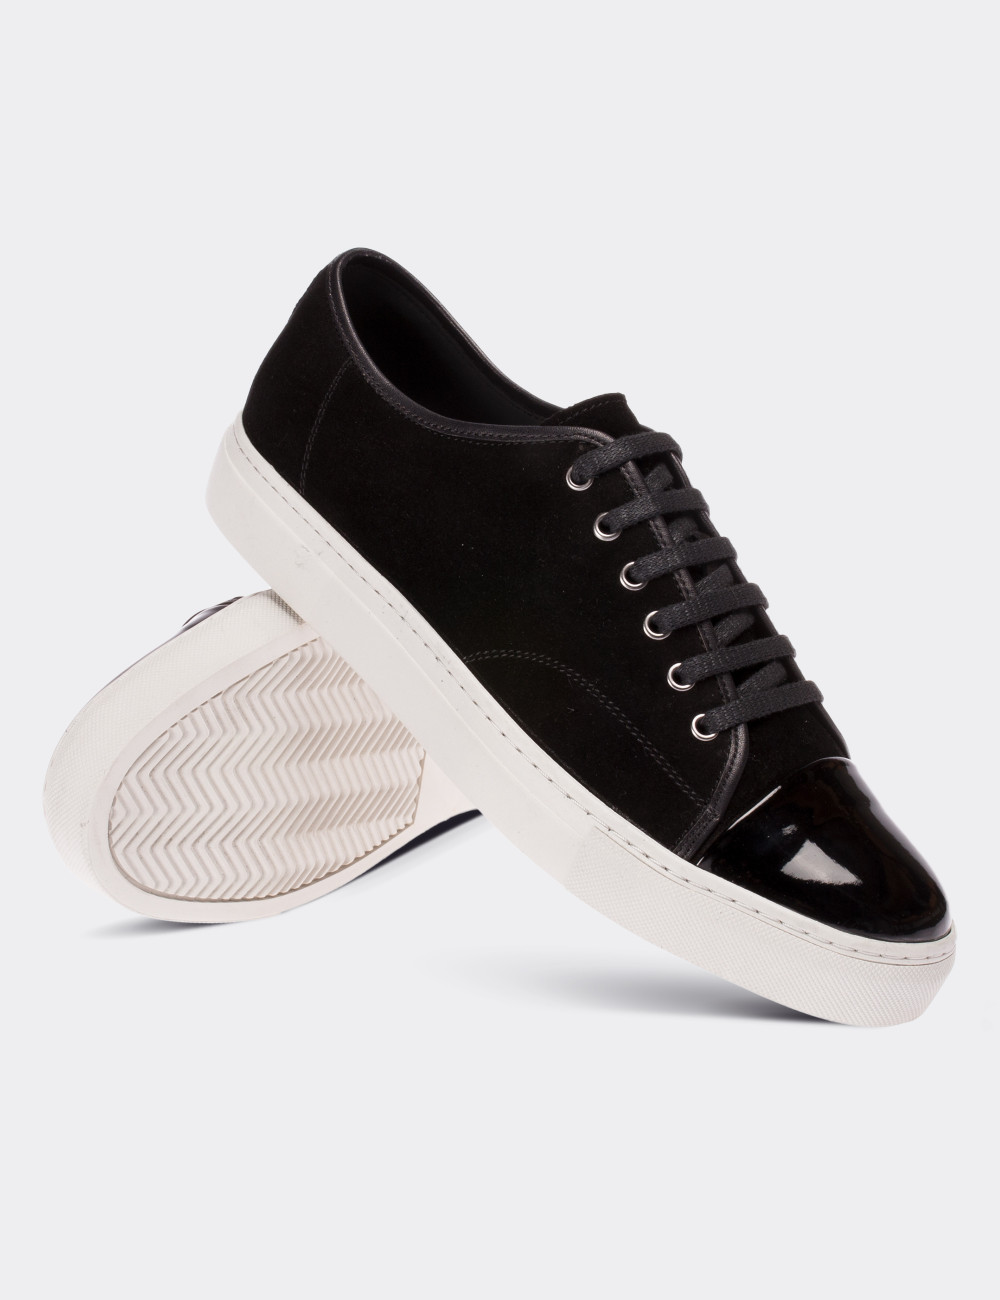 Black Suede Leather Sneakers - 01683MSYHC02